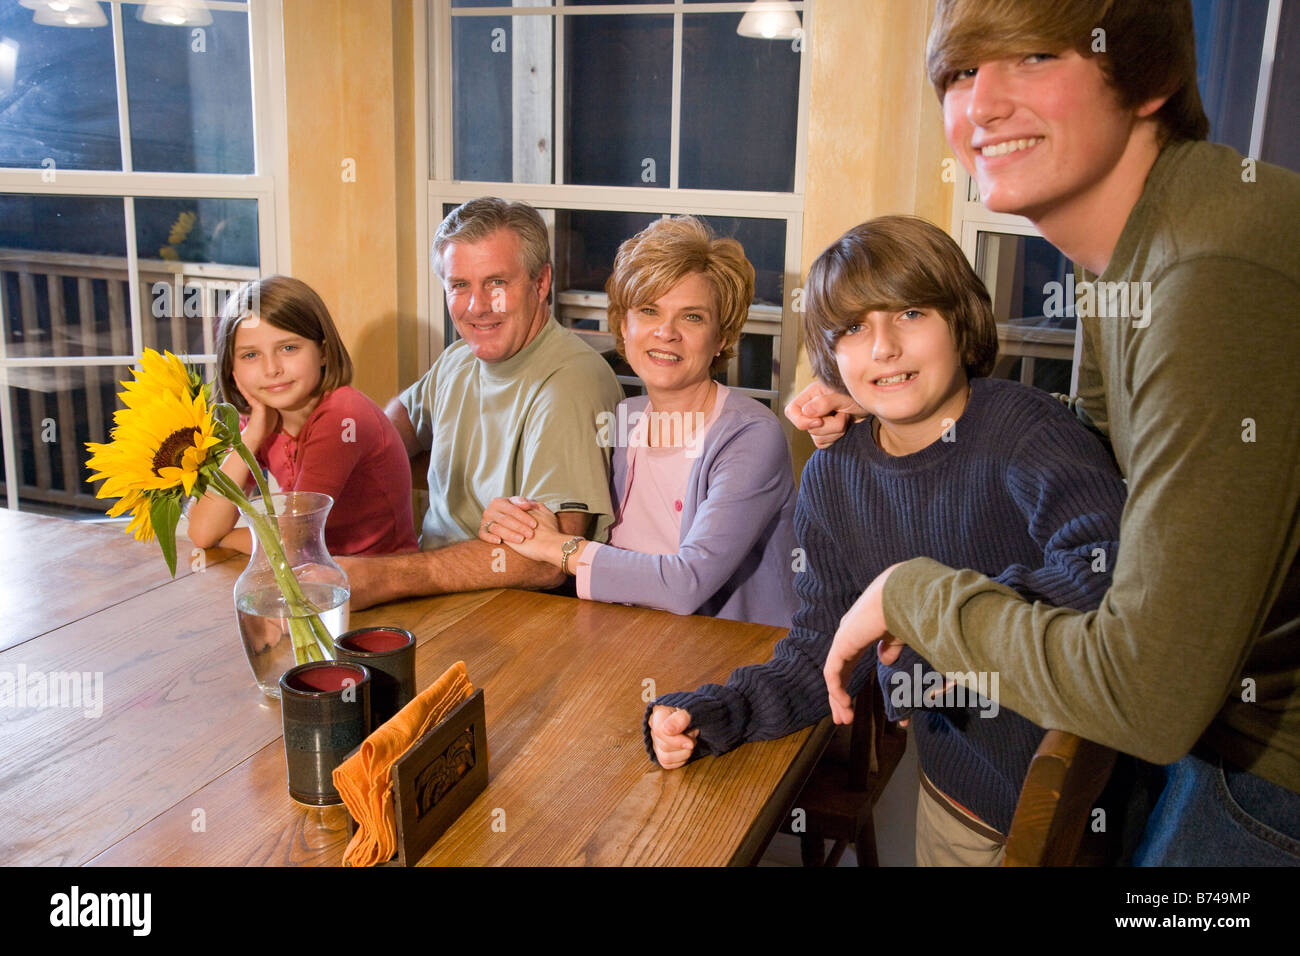 Portrait of family together hanging out in dining room Stock Photo